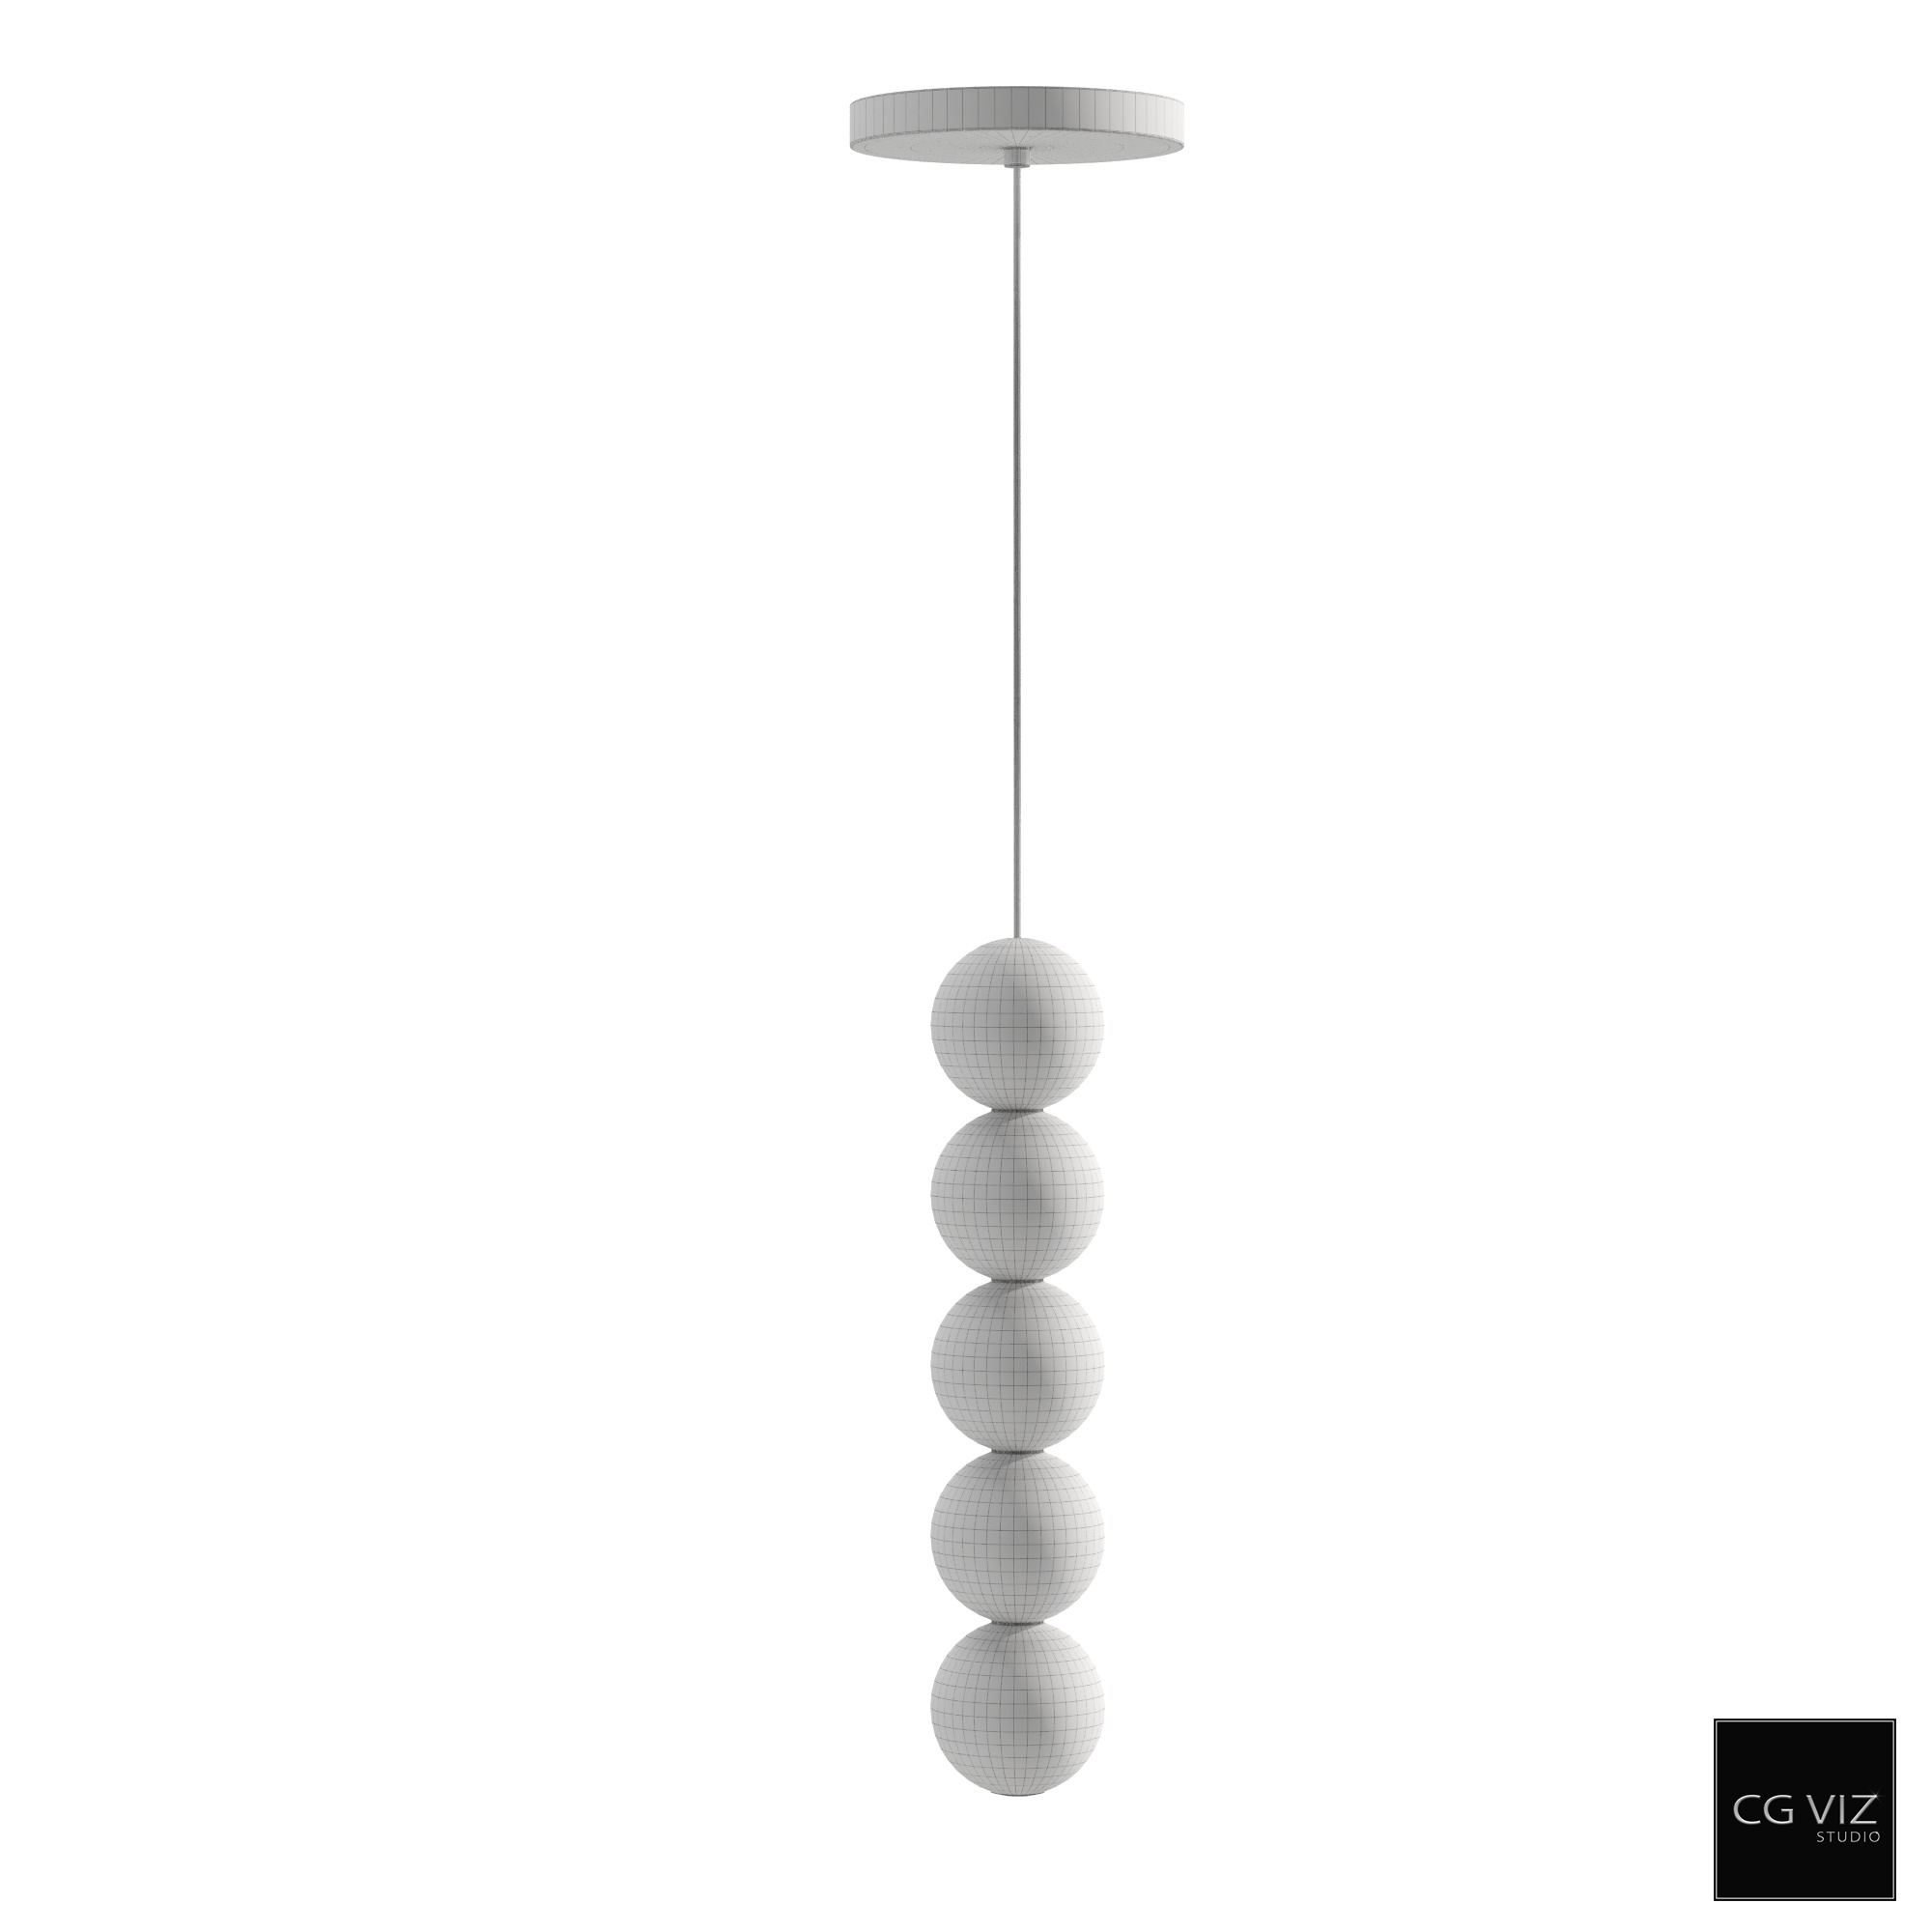 Wireframe View of Circa Orbet 5 Light Pendant 3D Model